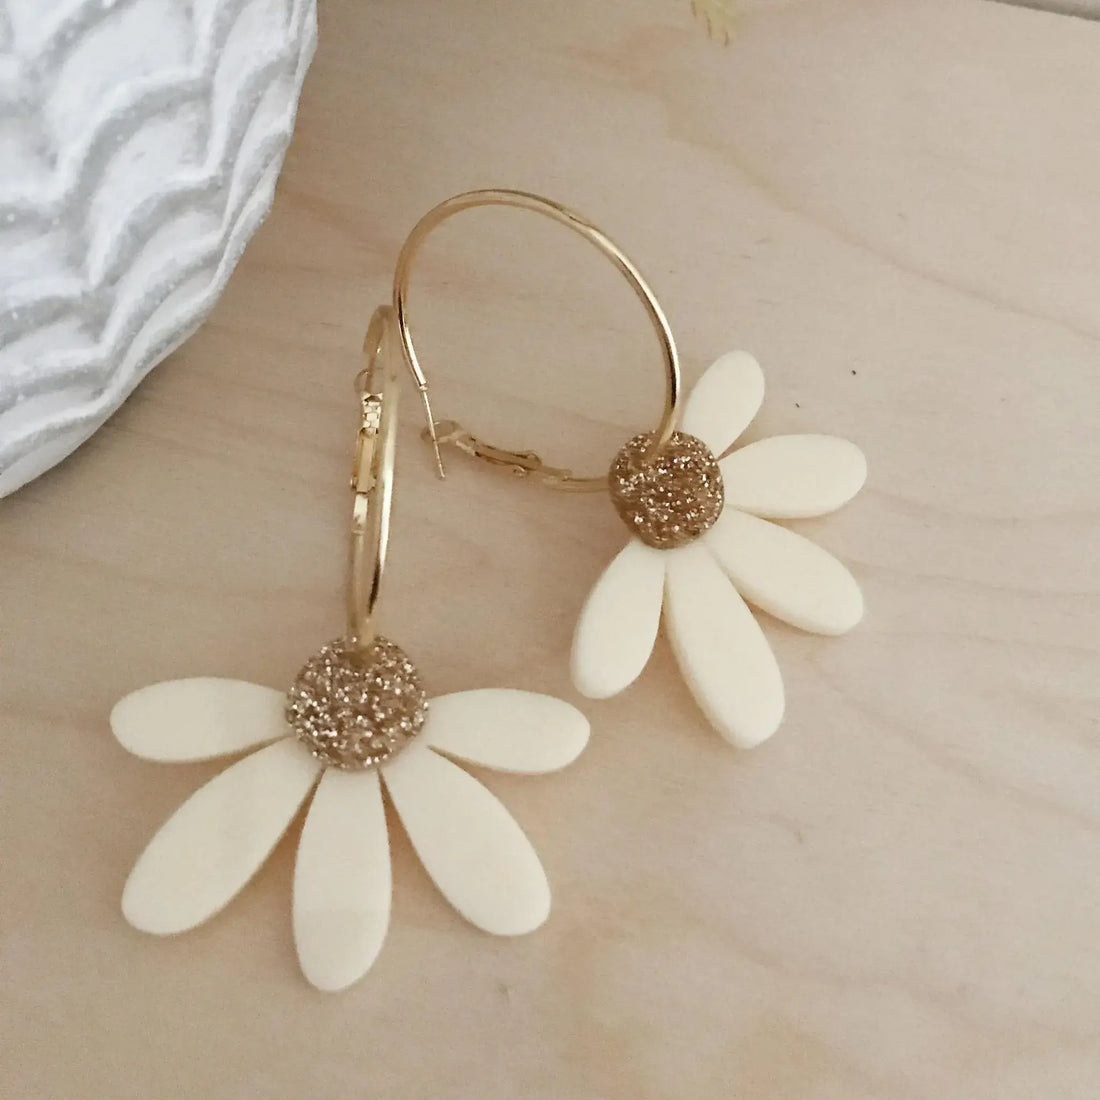 Jumbo Daisy Hoop Earrings in Cream &amp; Gold Glitter by Foxie Collective